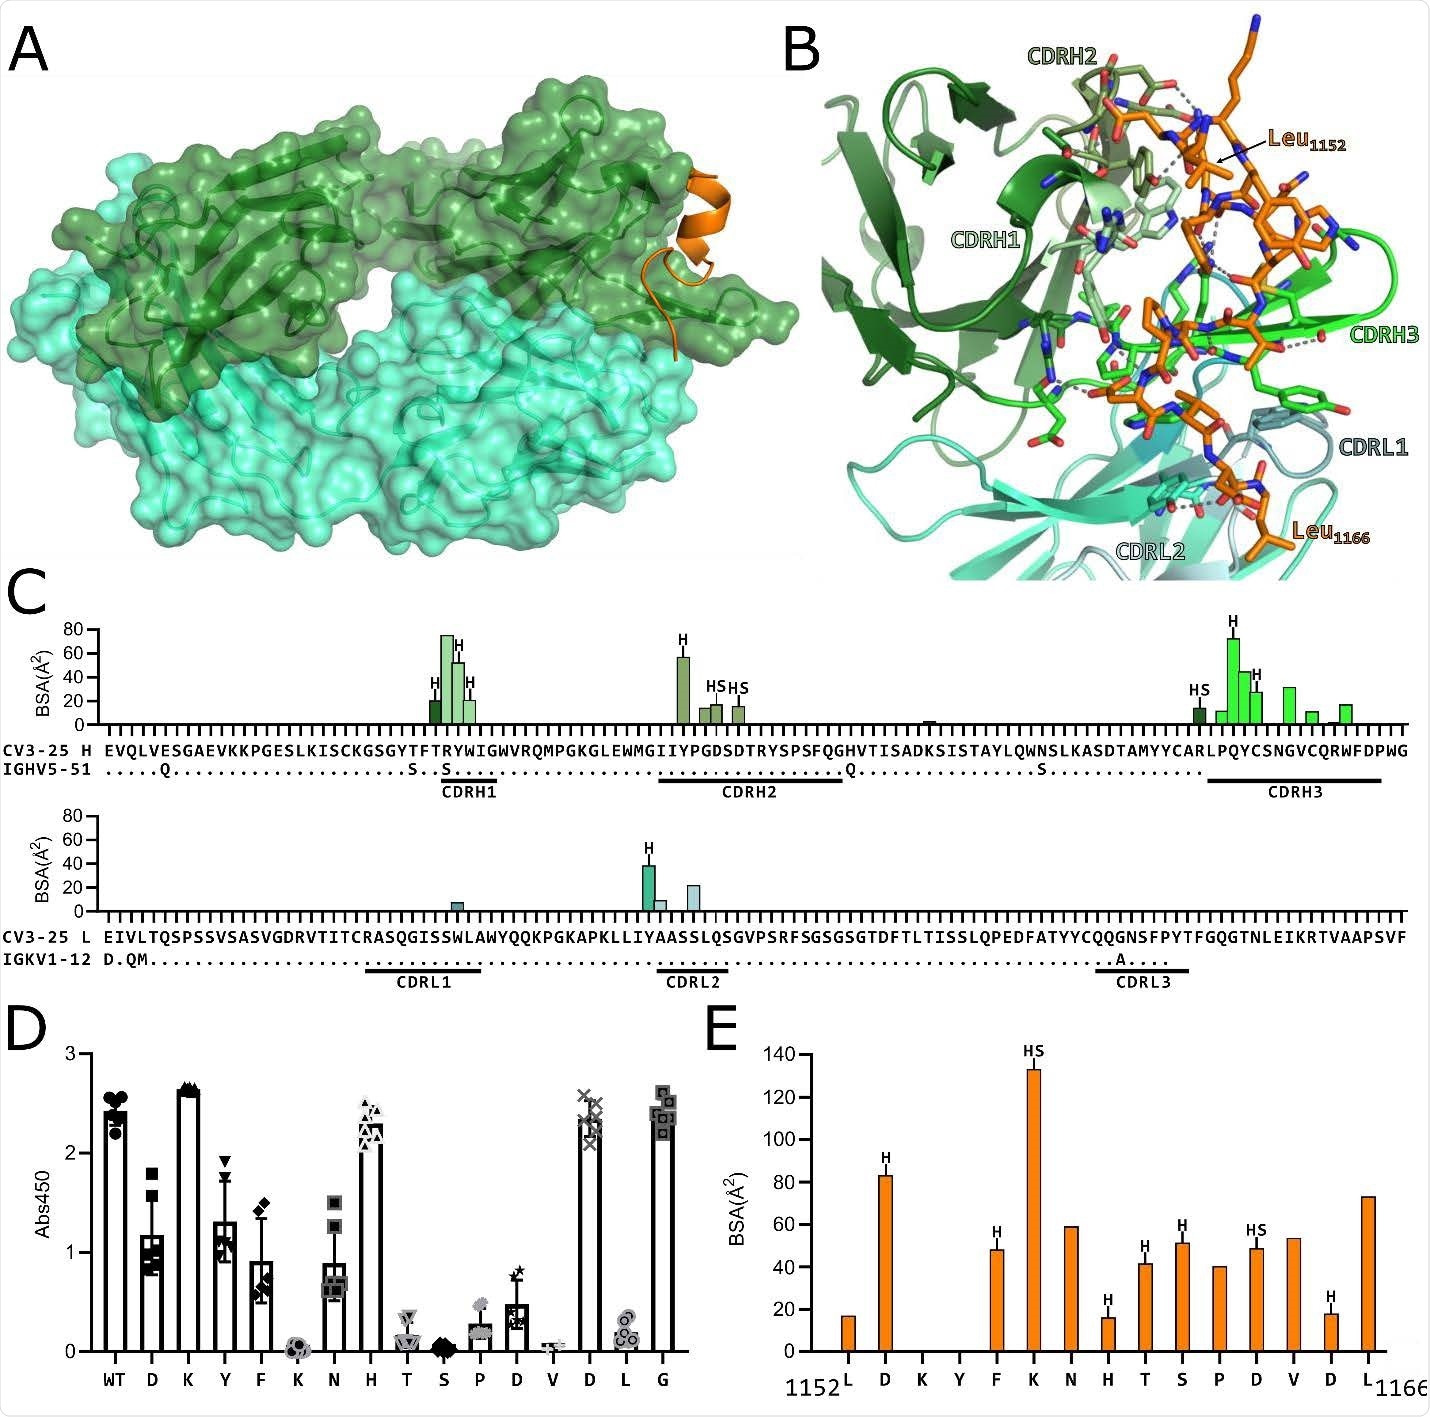 (A) Structure of CV3-25 Fab bound to stem helix peptide. CV3-25-peptide shown in ribbon structure with mAb surface representation shown in transparency. CV3- 25 heavy chain is shown in green and light chain in cyan. The peptide is shown in orange. (B) Details of the interactions between the Fab and the peptide. Complementary determining regions (CDRs) are labeled and colored as shown. Hydrogen bonds between Fab residues and the peptide are shown with dashed black lines. (C) Plots of buried surface area (BSA) of each Fab residue interacting with the peptide and a sequence alignment with the corresponding V-gene. CDRs are labelled and color coded to match the structure shown in B. Residues engaged in a hydrogen bond or salt bridge are marked with an “H” or “S”, respectively. (D) Alanine scanning plot of the stem helix region that CV3-25 binds. CV3-25 binding to linear peptides corresponding to amino acids 1153-1167 of the SARS-CoV-2 spike, where each amino acid was substituted by alanine was measured by ELISA. The absorbance at 450 nm resulting from the addition of 1.25 µg of CV3-25 is shown. Each dot represents a technical replicate from three independent experiments conducted in duplicate. Full titrations are shown in Figure S1. (E) Plot of the BSA of each stem helix peptide residue.